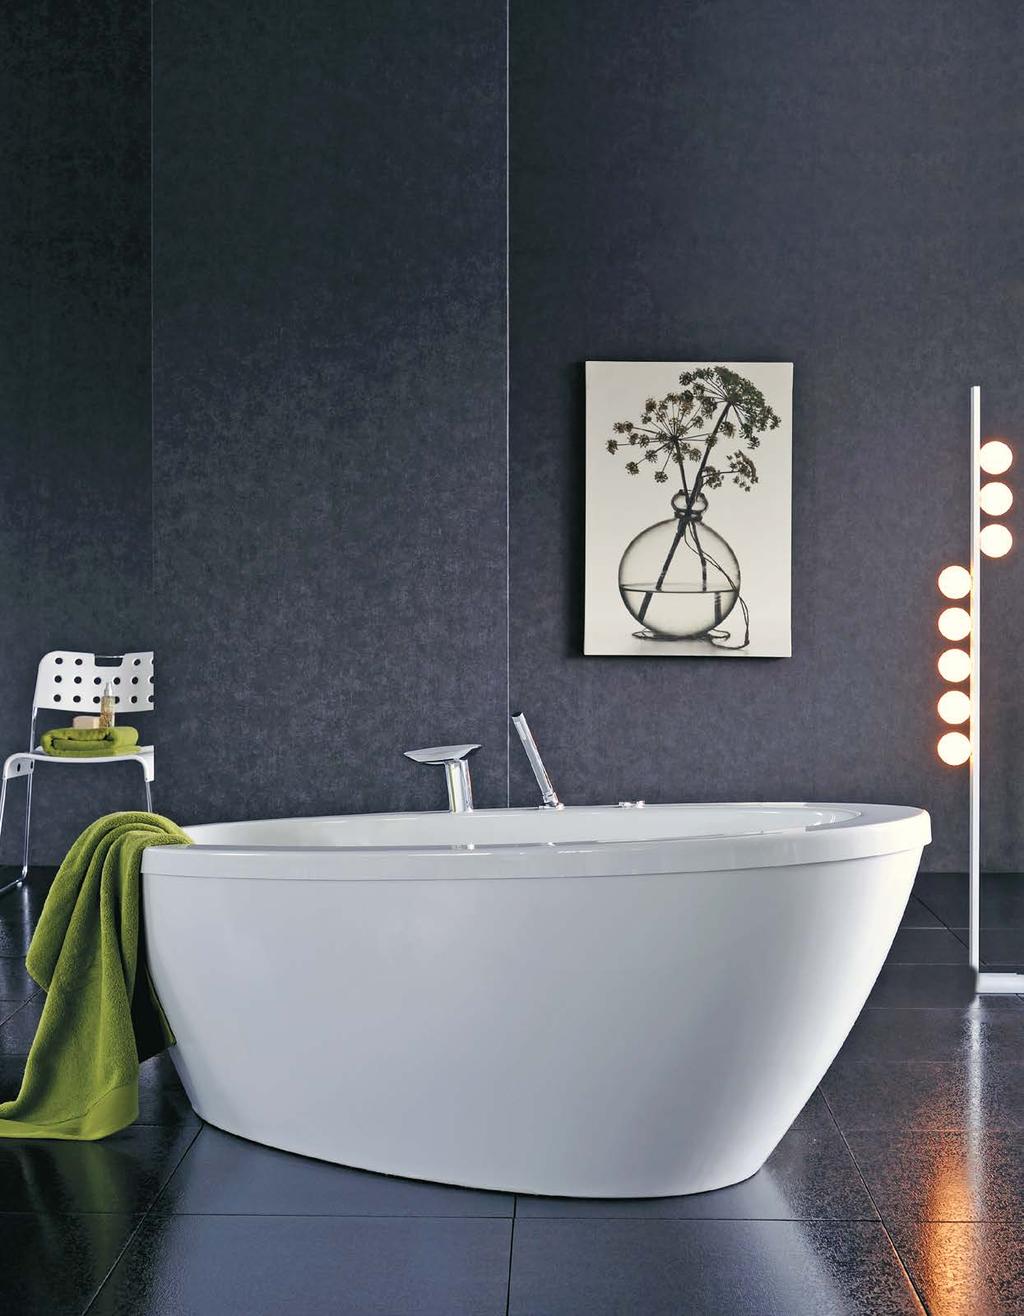 4 LIFE BATHS NOA 4LIFE BATHS The ultimate in bathing comfort and style. NOA has redefined the traditional concept of the bath, from functional item, to functioning work of art.